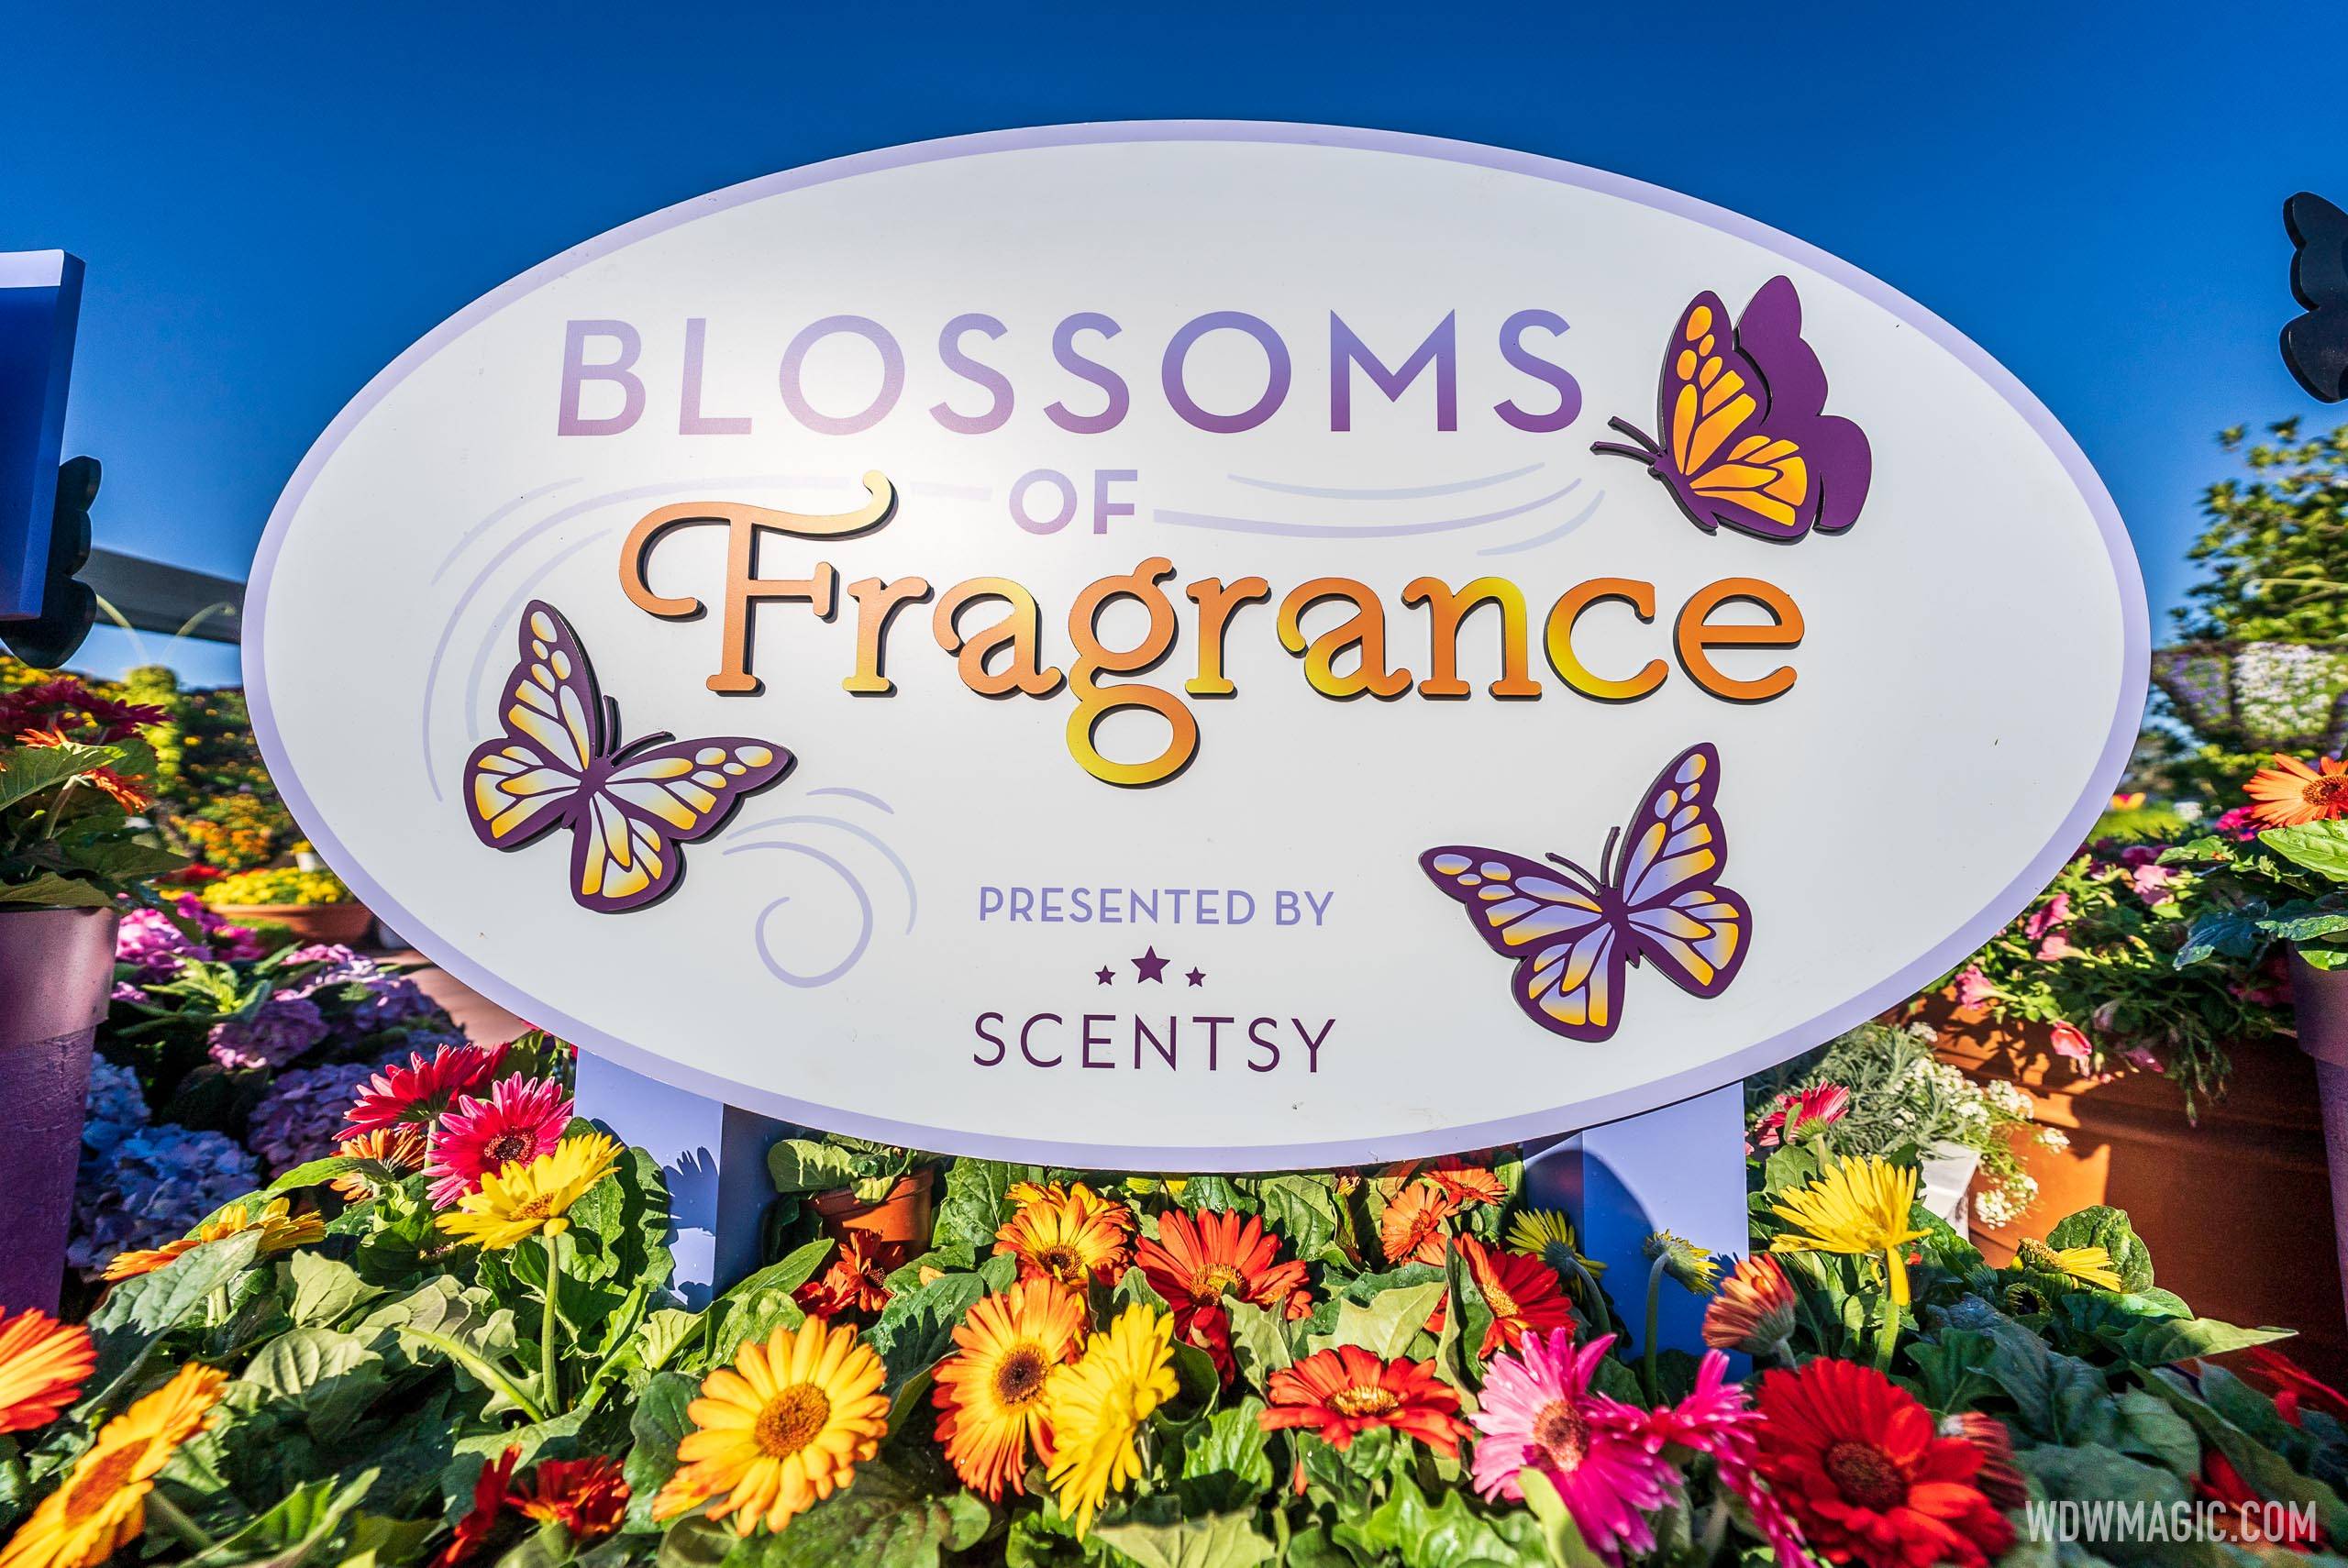 Blossoms of Fragrance presented by Scentsy